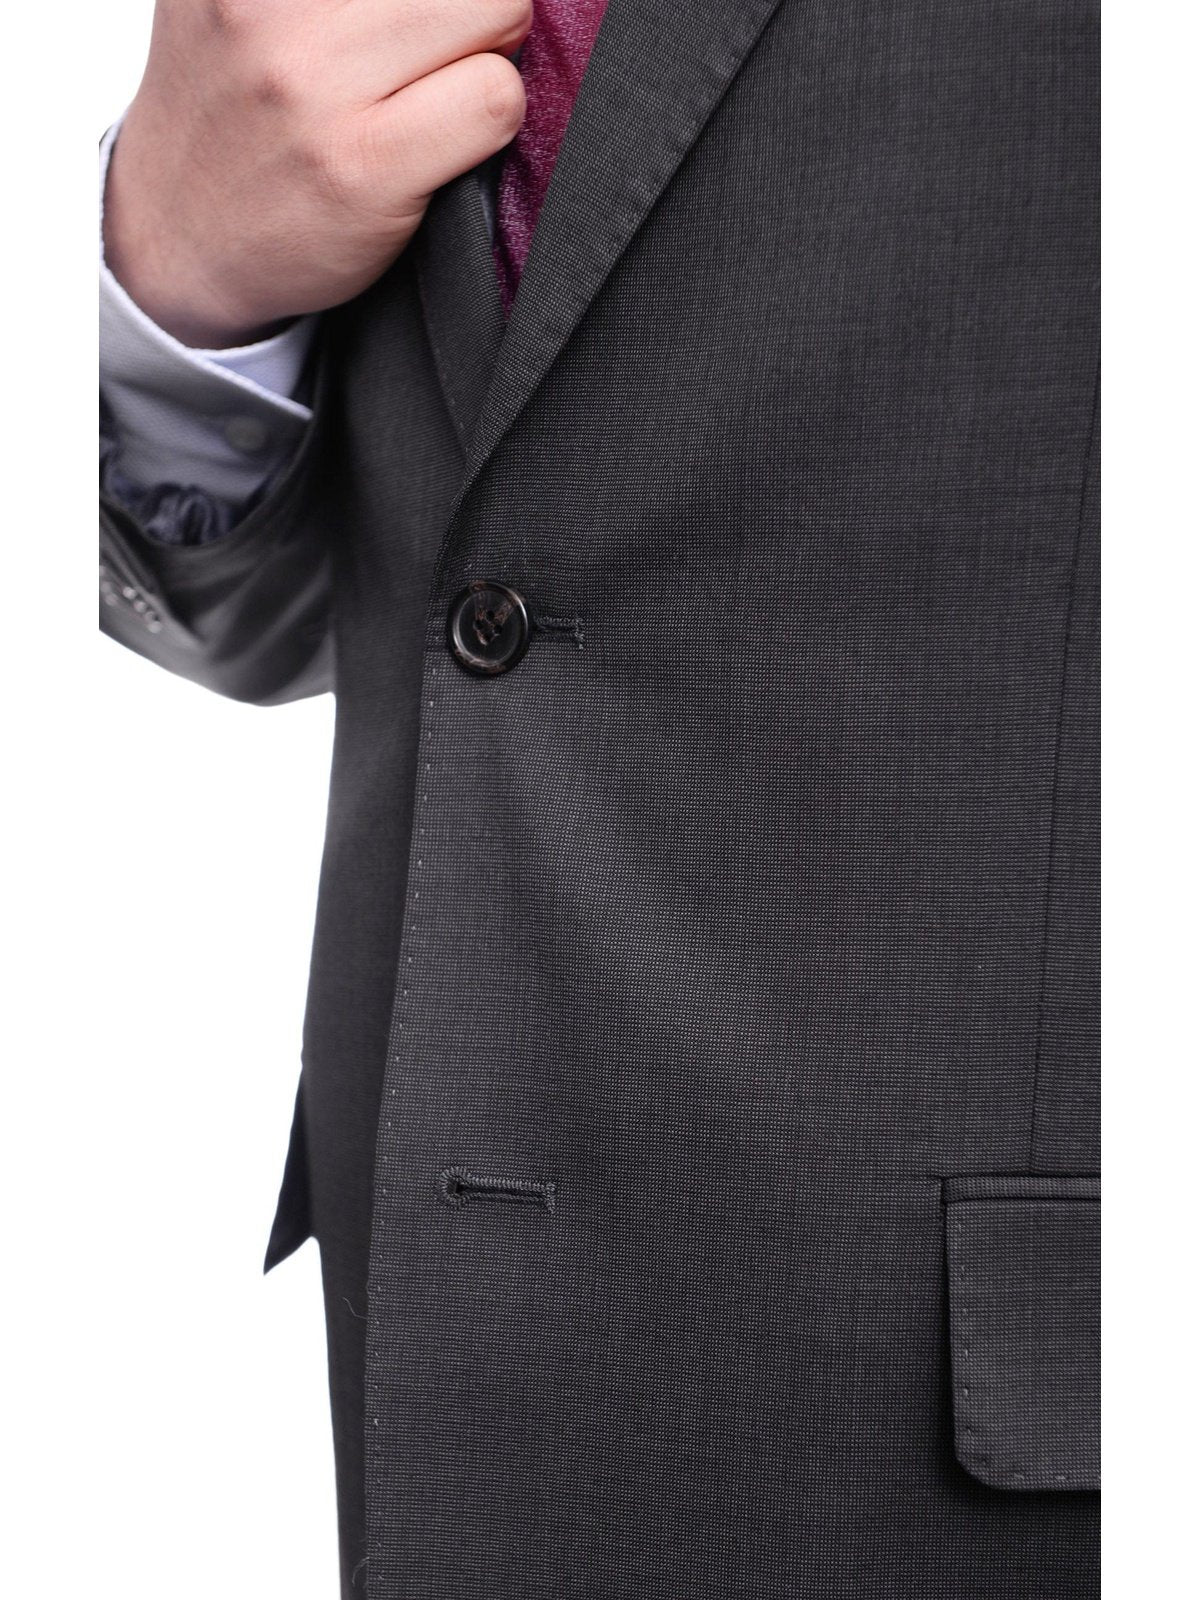 Arthur Black TWO PIECE SUITS Men's Arthur Black Executive Portly Fit Solid Gray Textured Two Button Wool Suit